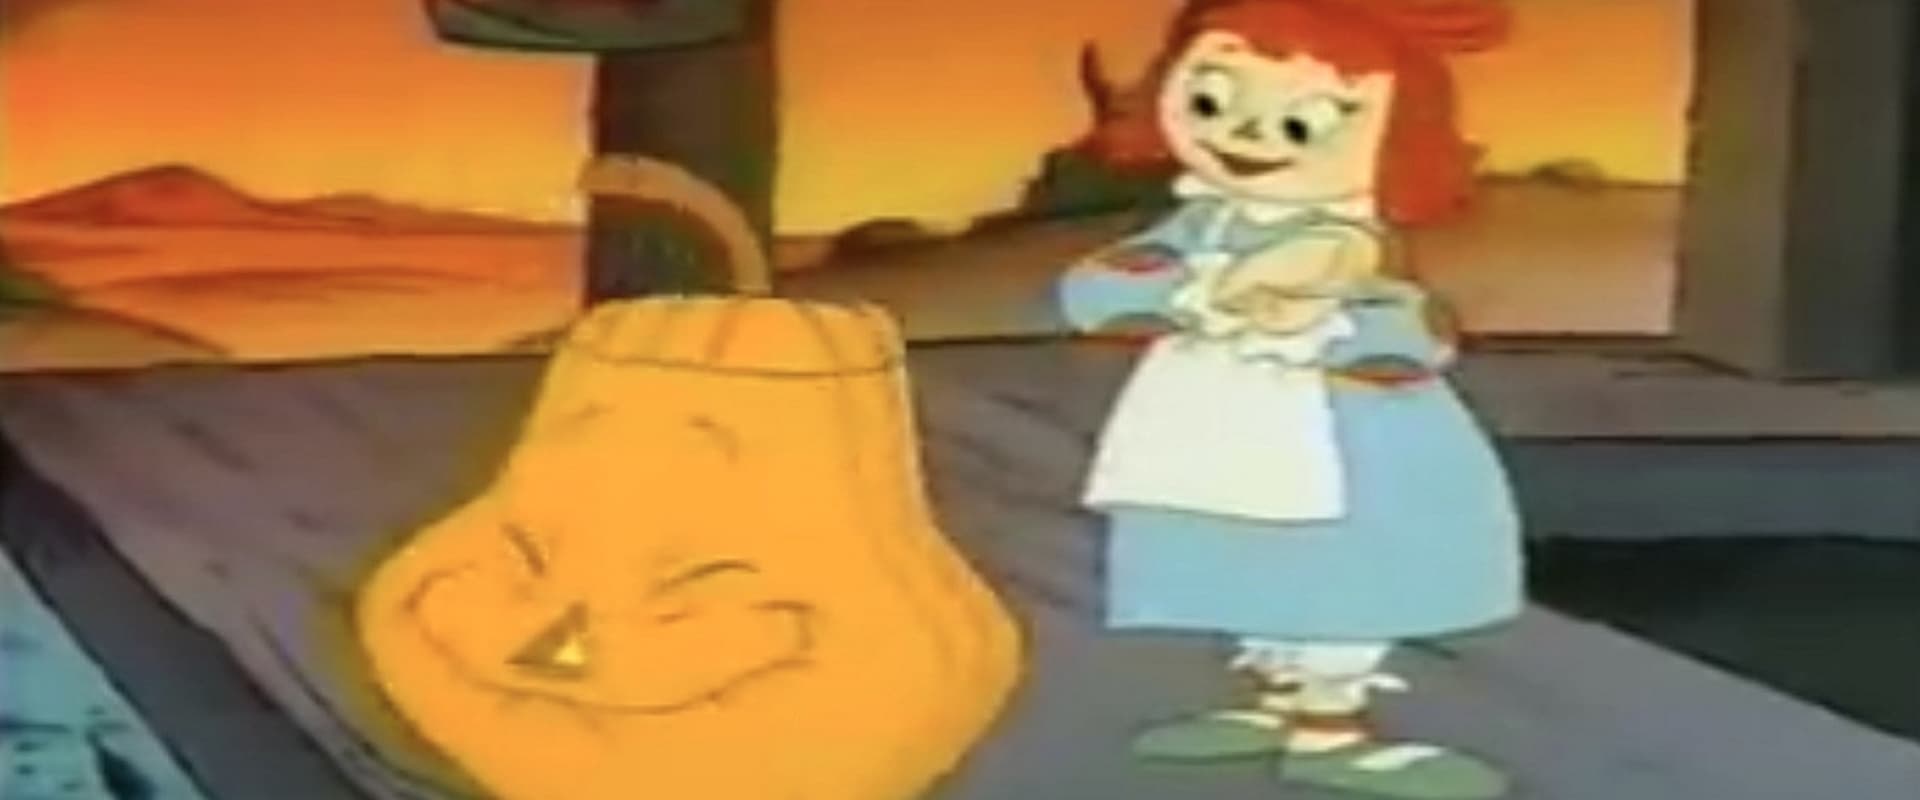 Raggedy Ann and Raggedy Andy in the Pumpkin Who Couldn't Smile